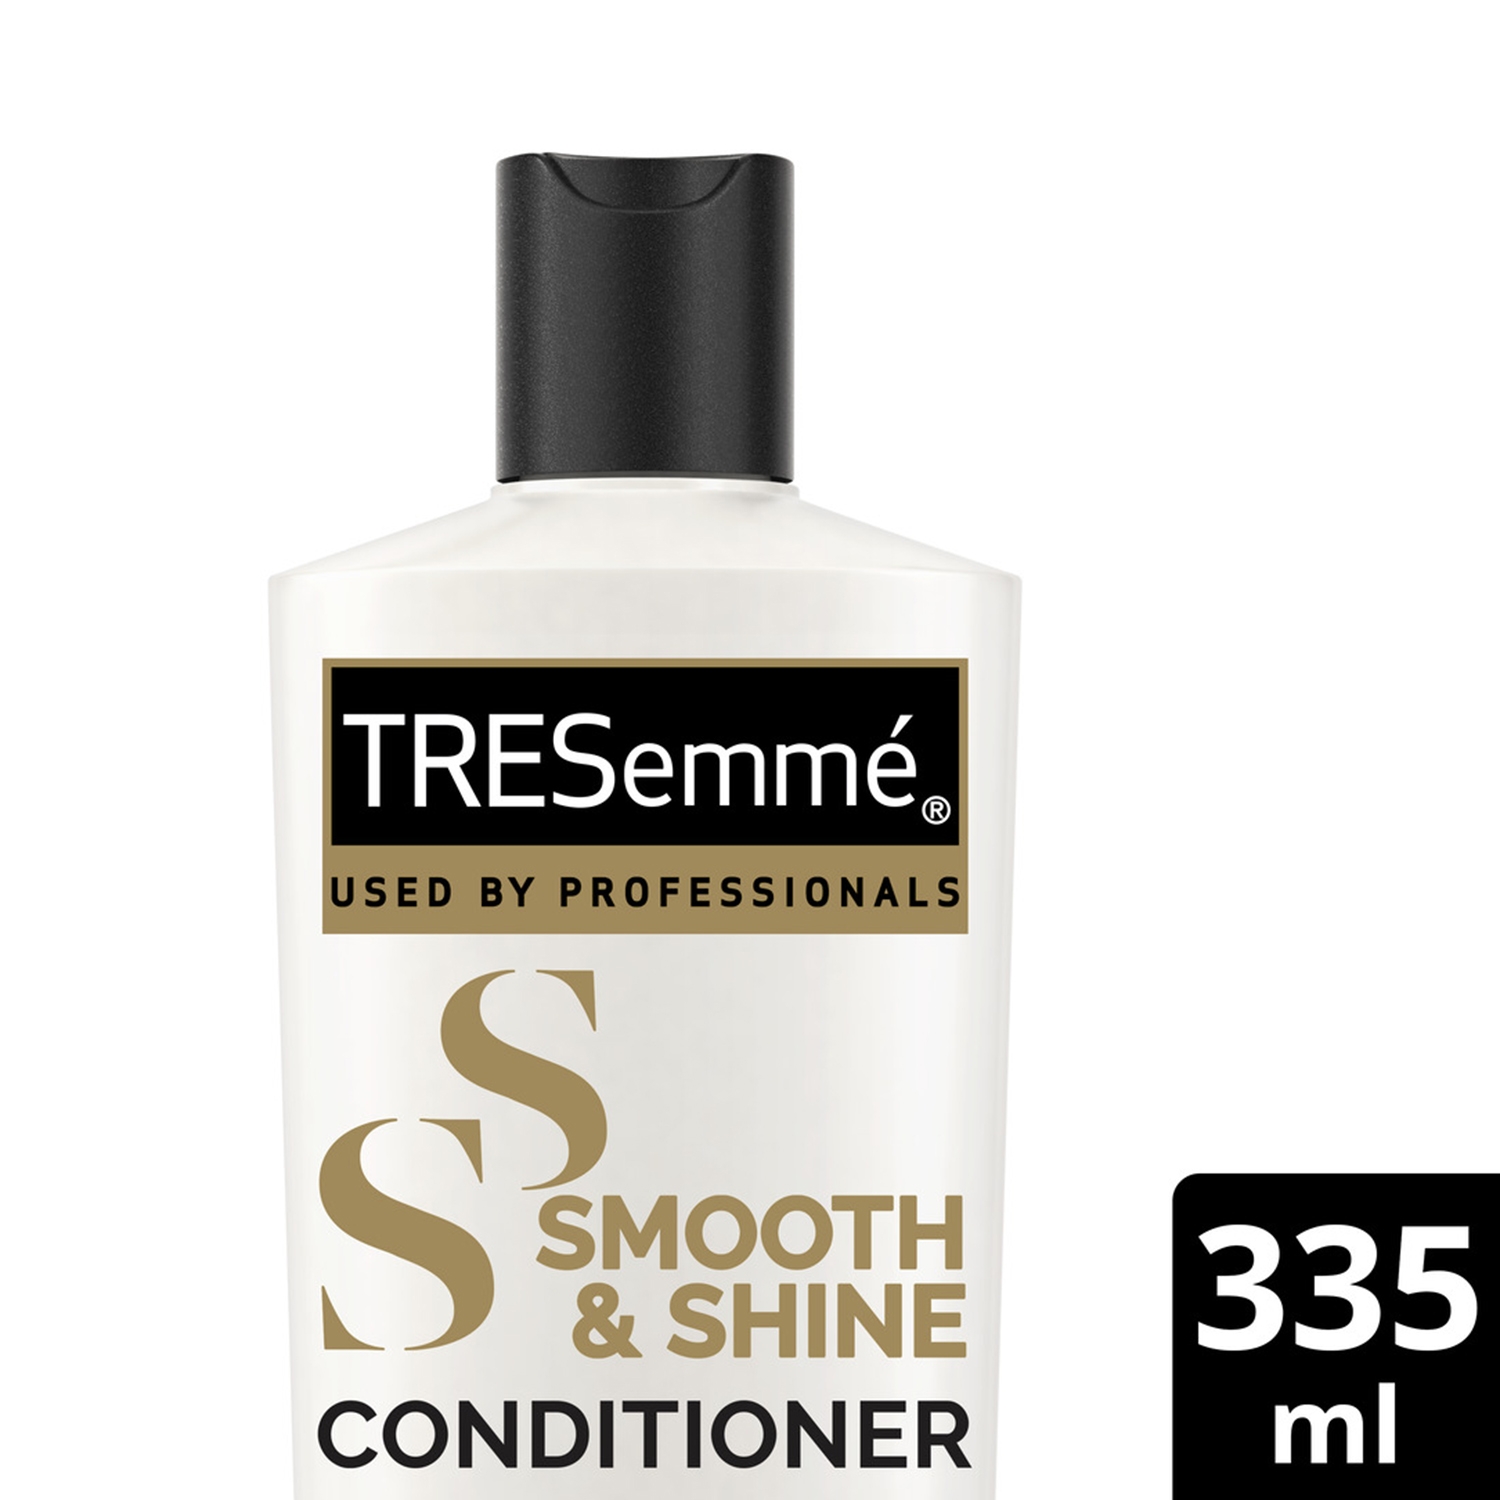 Tresemme | Tresemme Smooth & Shine Conditioner (340ml)